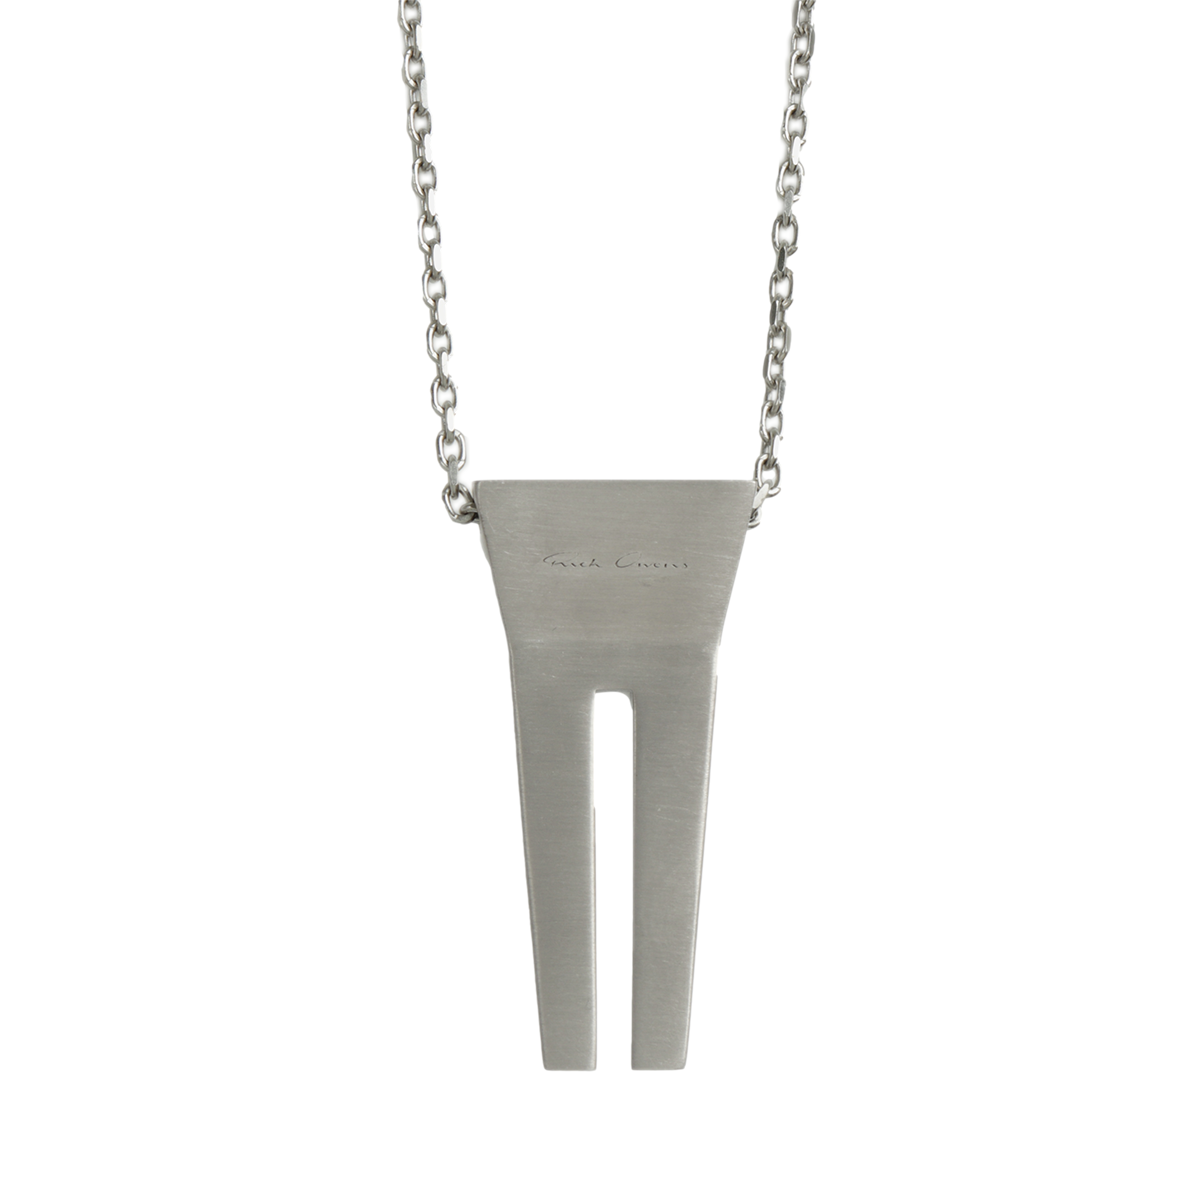 [Rick Owens] Trunk Charm Necklace